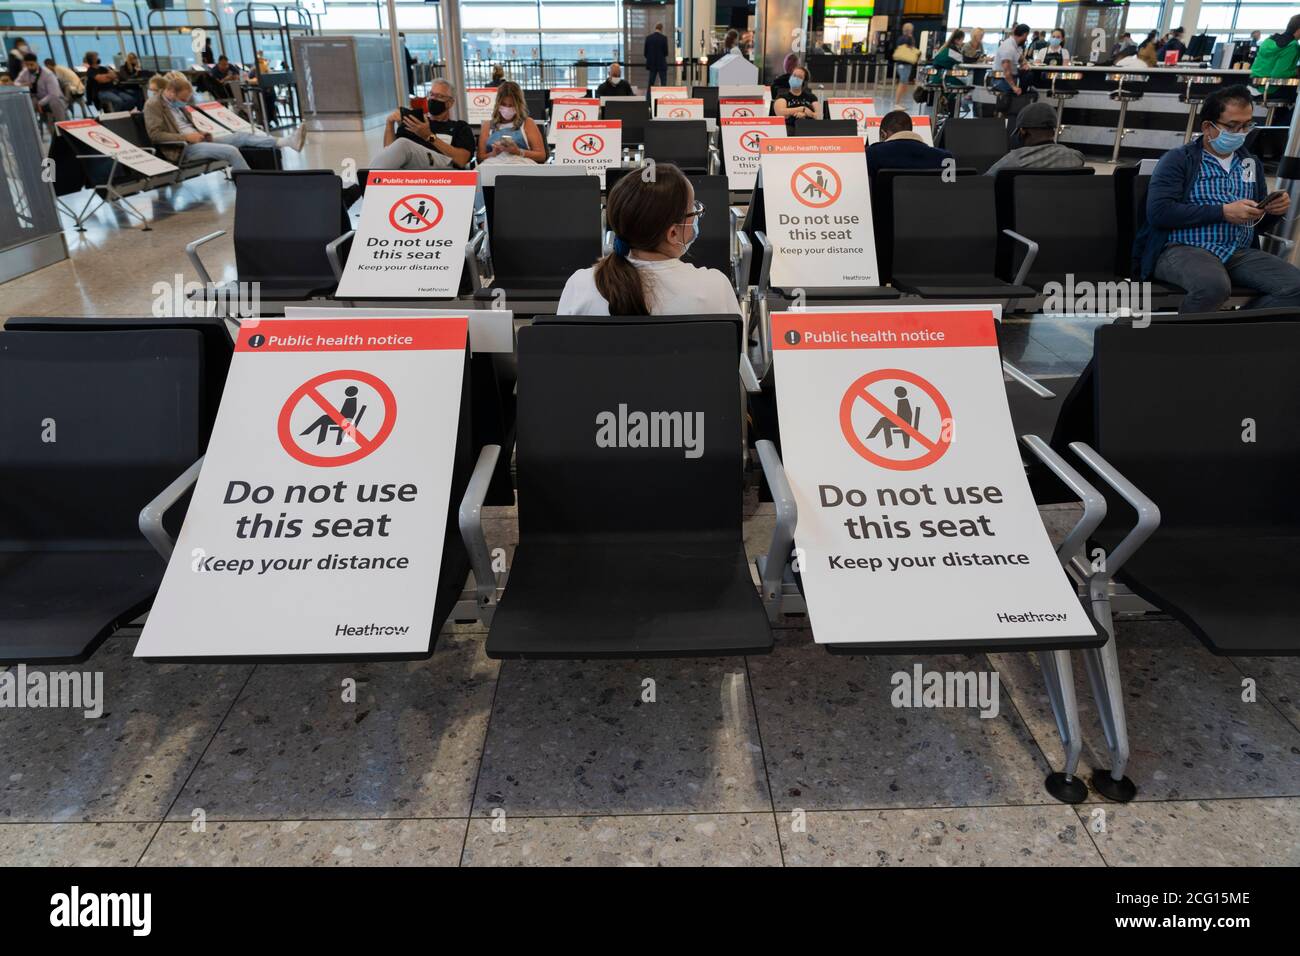 Seating blocked off with signs to maintain social distancing for public health, Terminal 3 in Heathrow Airport, for the Covid-19 Coronavirus pandemic Stock Photo